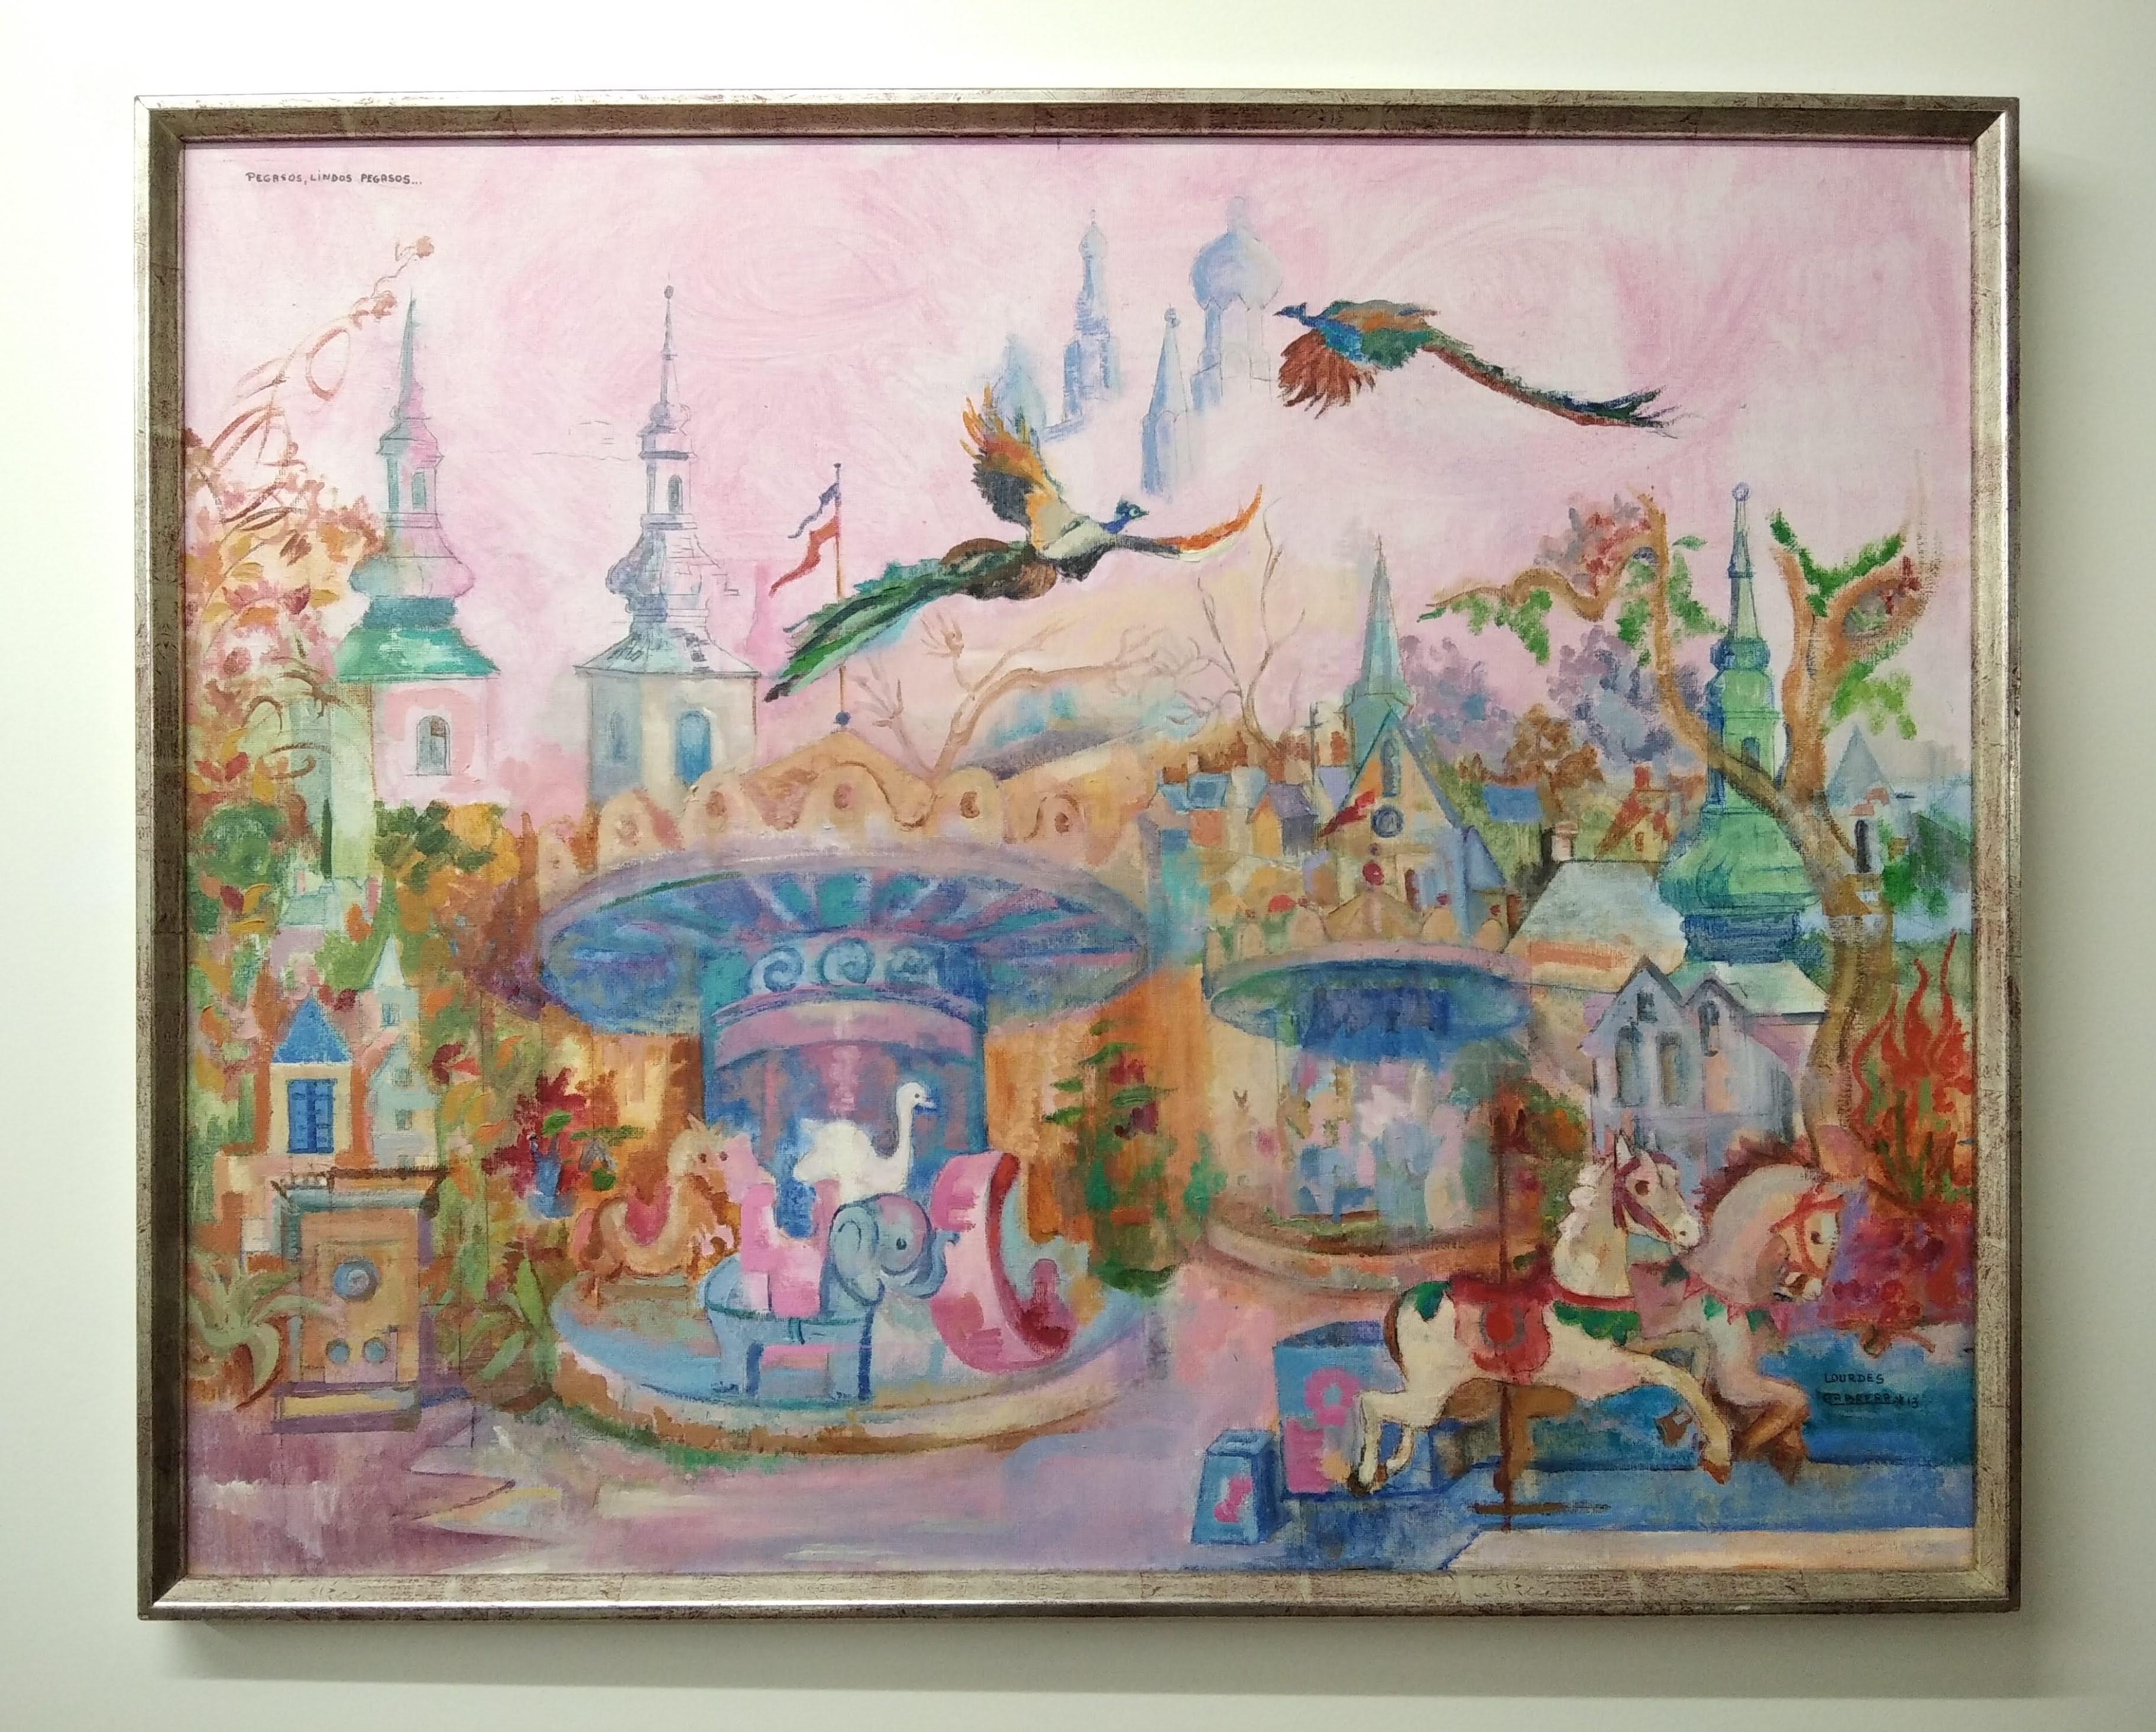 El carrusel ('The carousel') - Painting by Lourdes Cabrera